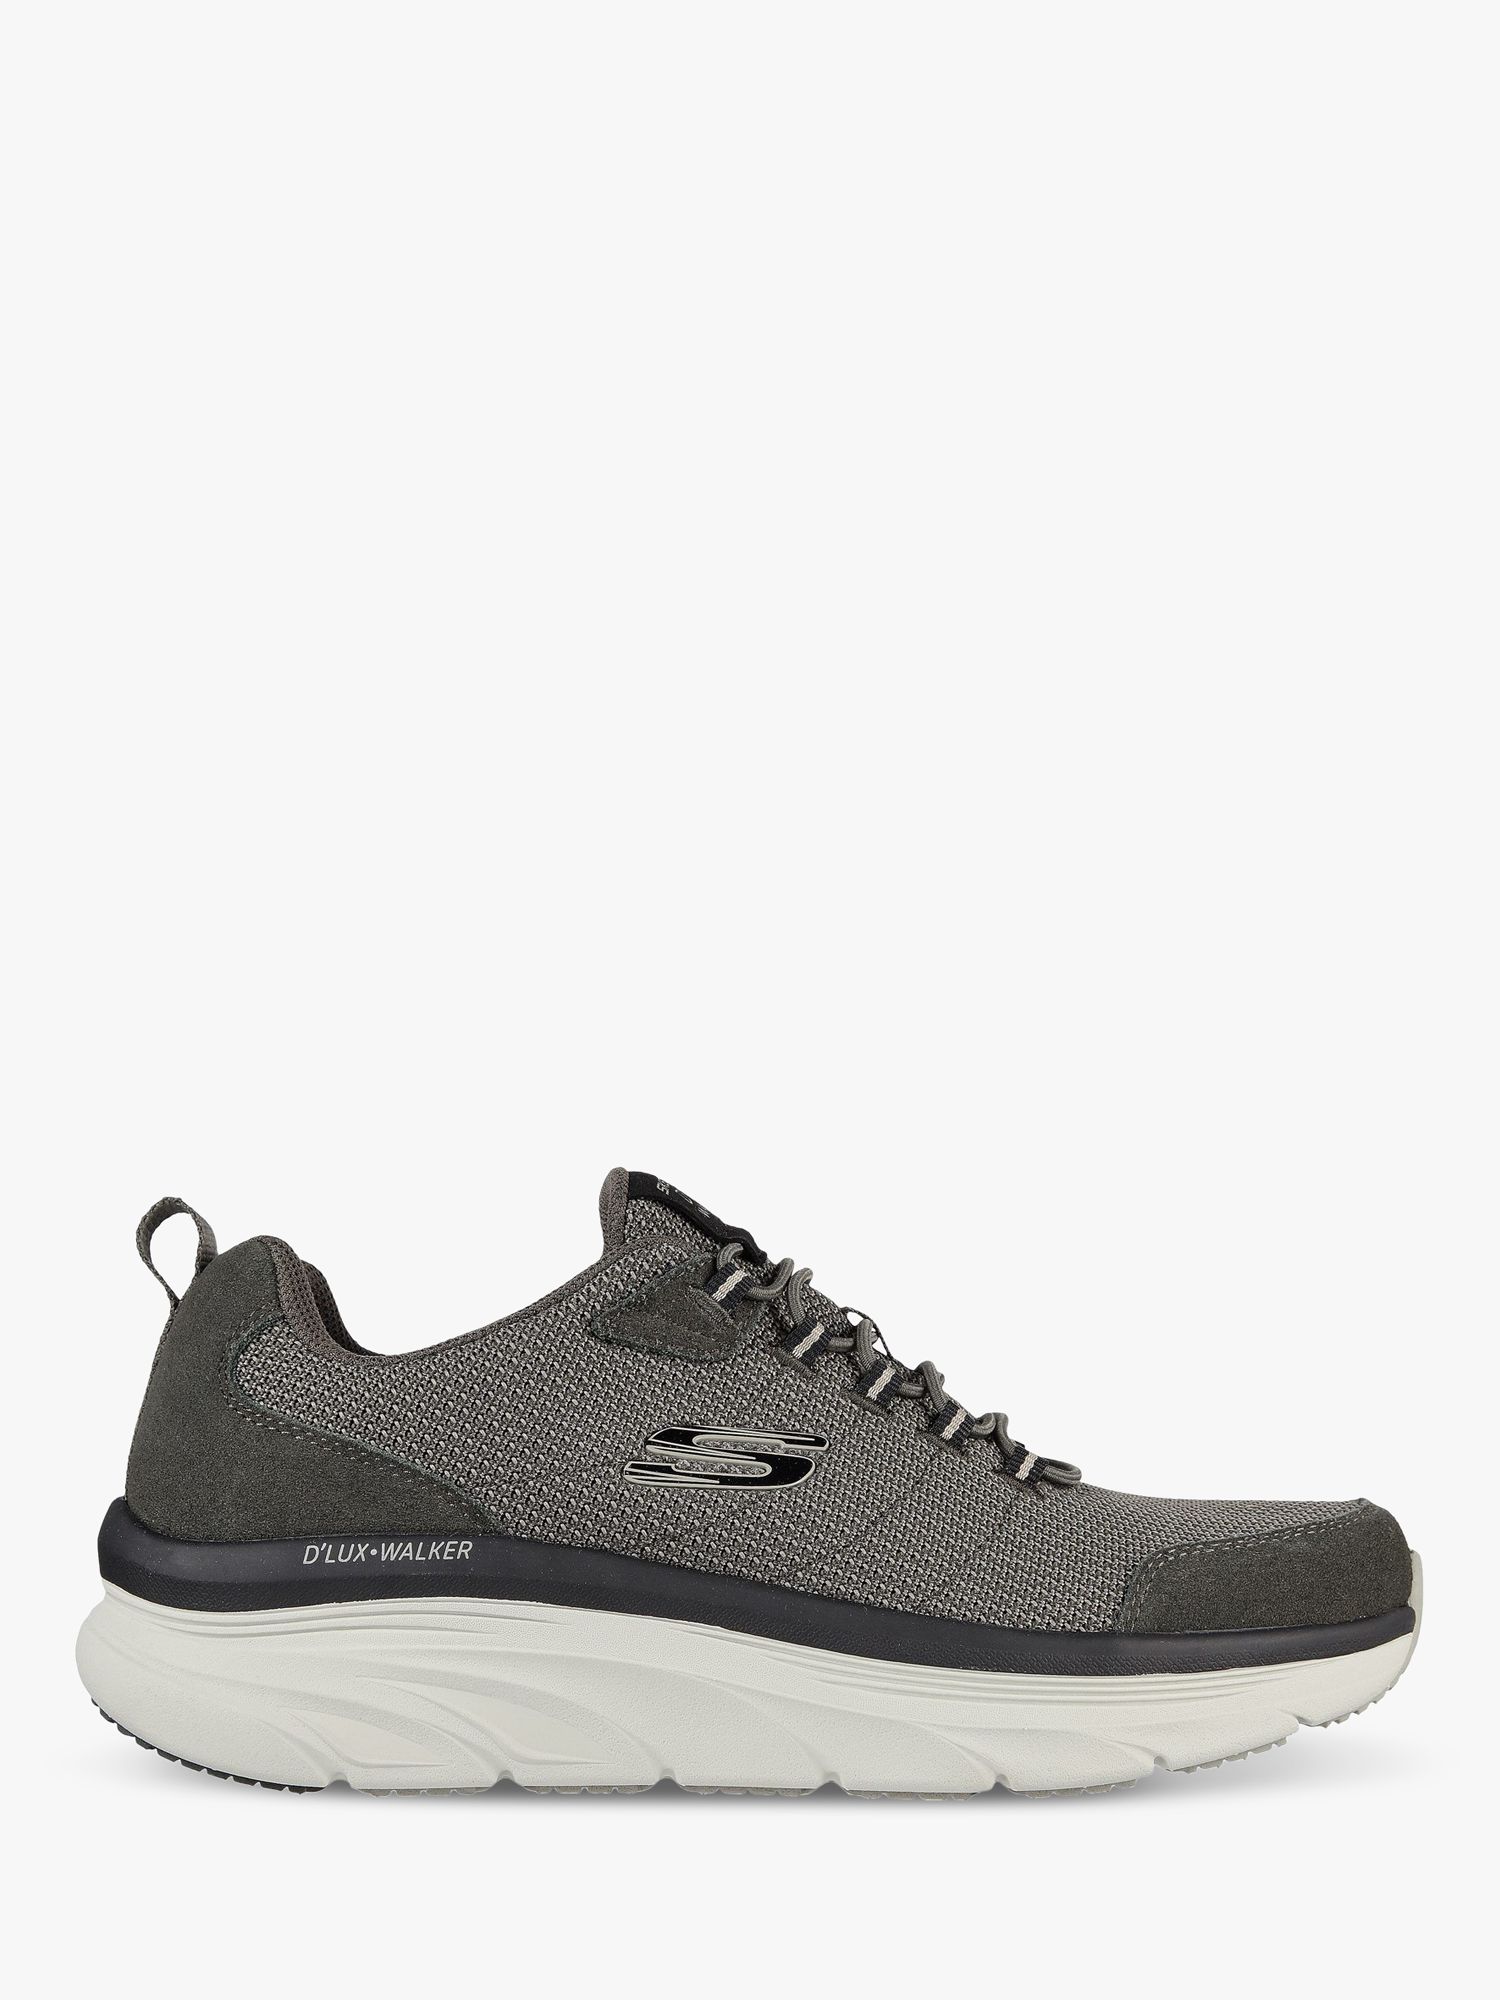 Skechers Relaxed Fit D'Lux Walker Bersaga Trainers, Olive at John Lewis ...